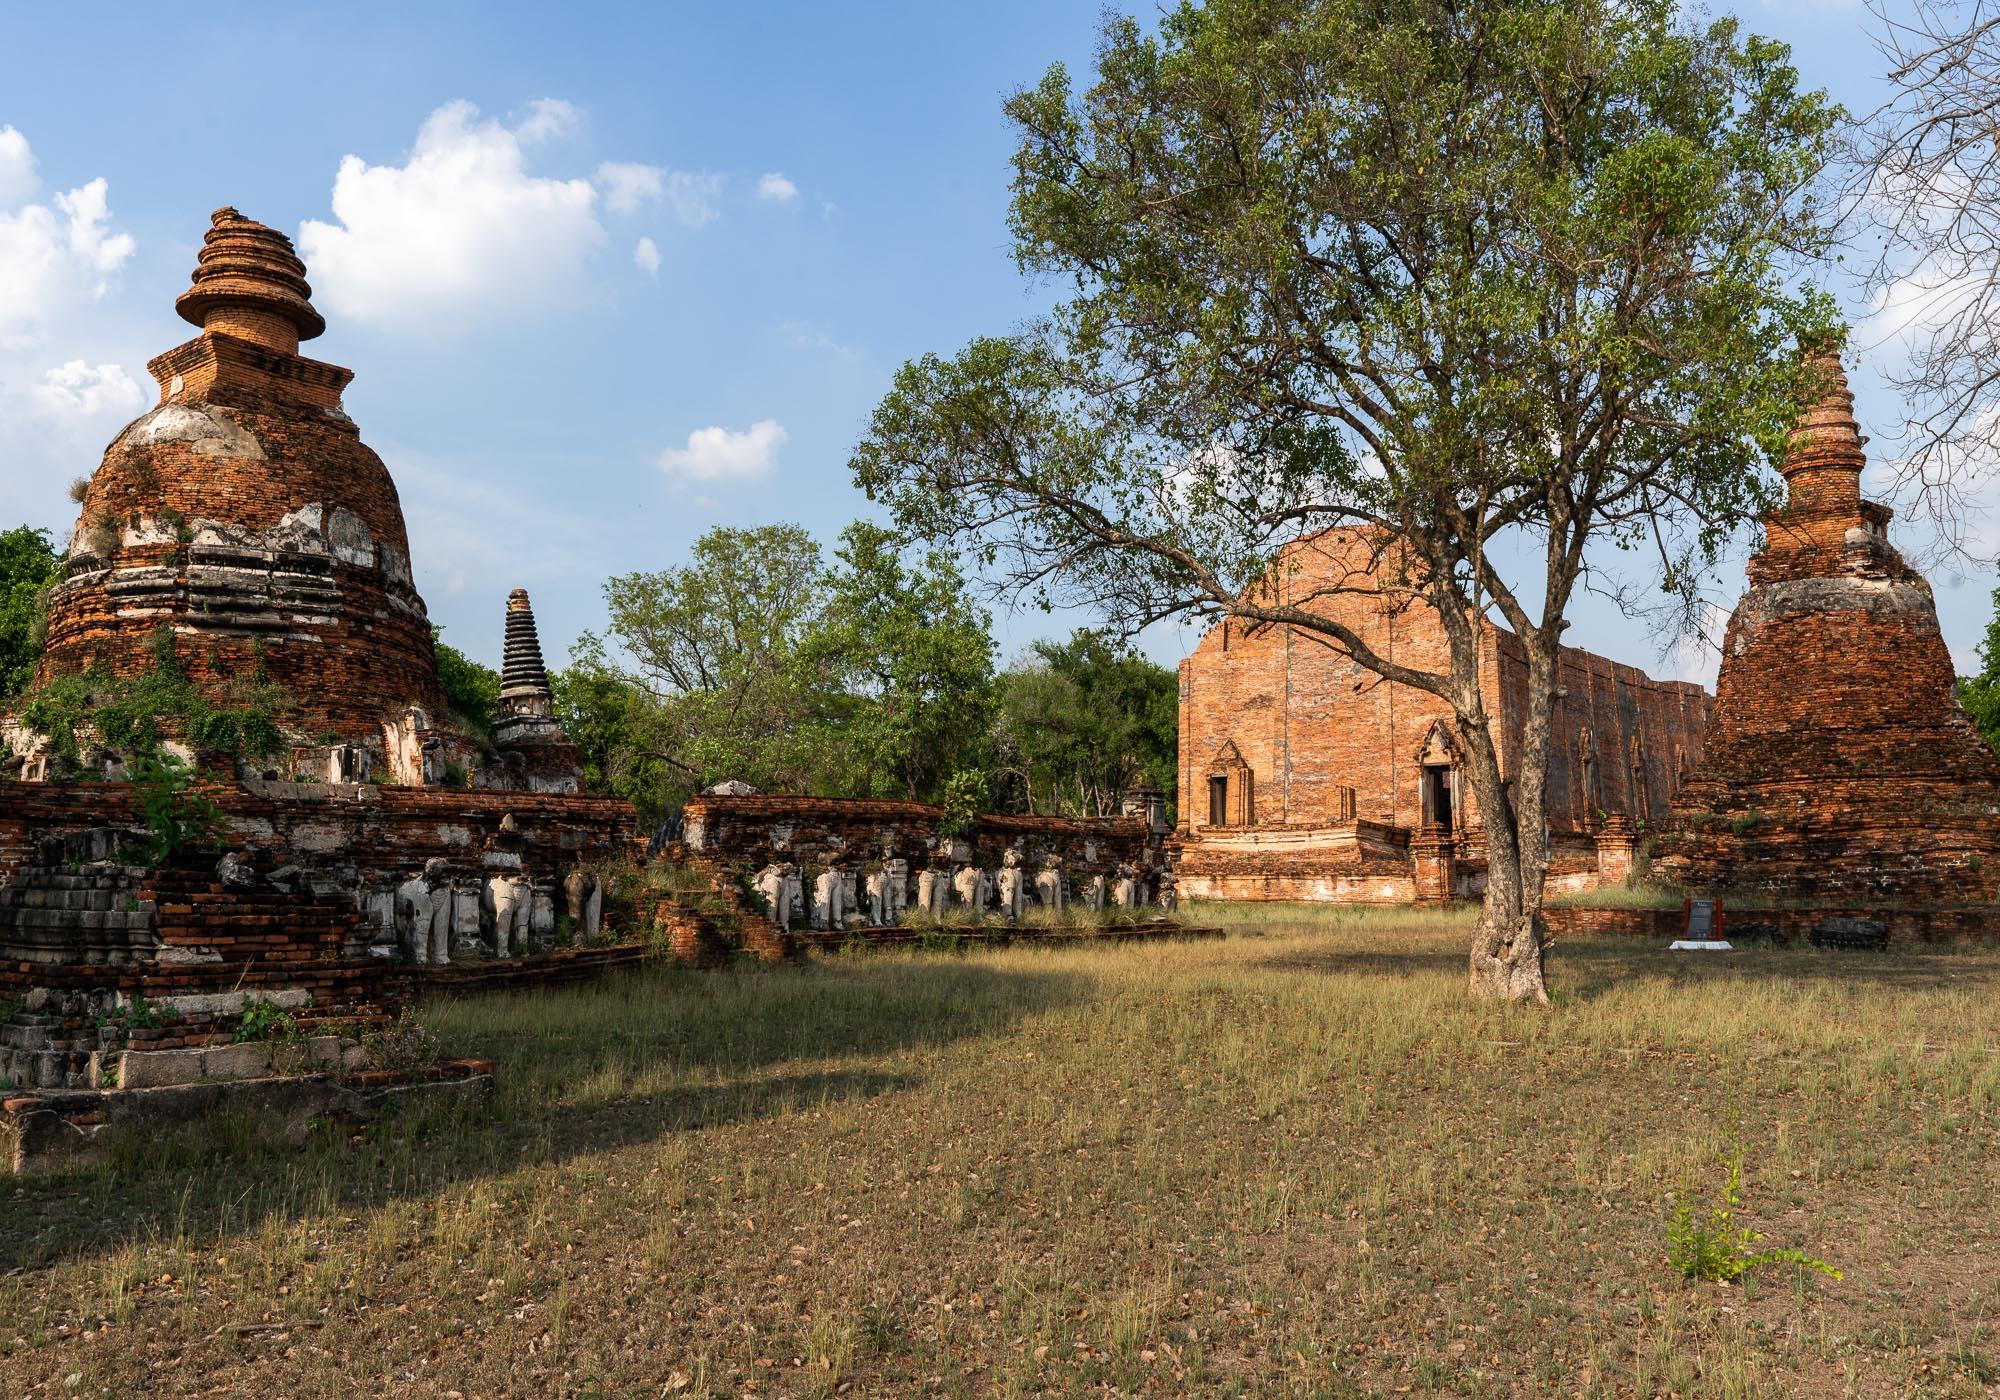 Looking across Wat Maheyong, with the bell-shaped stupa on the left and the large ordination hall on the right. – © Michael Turtle